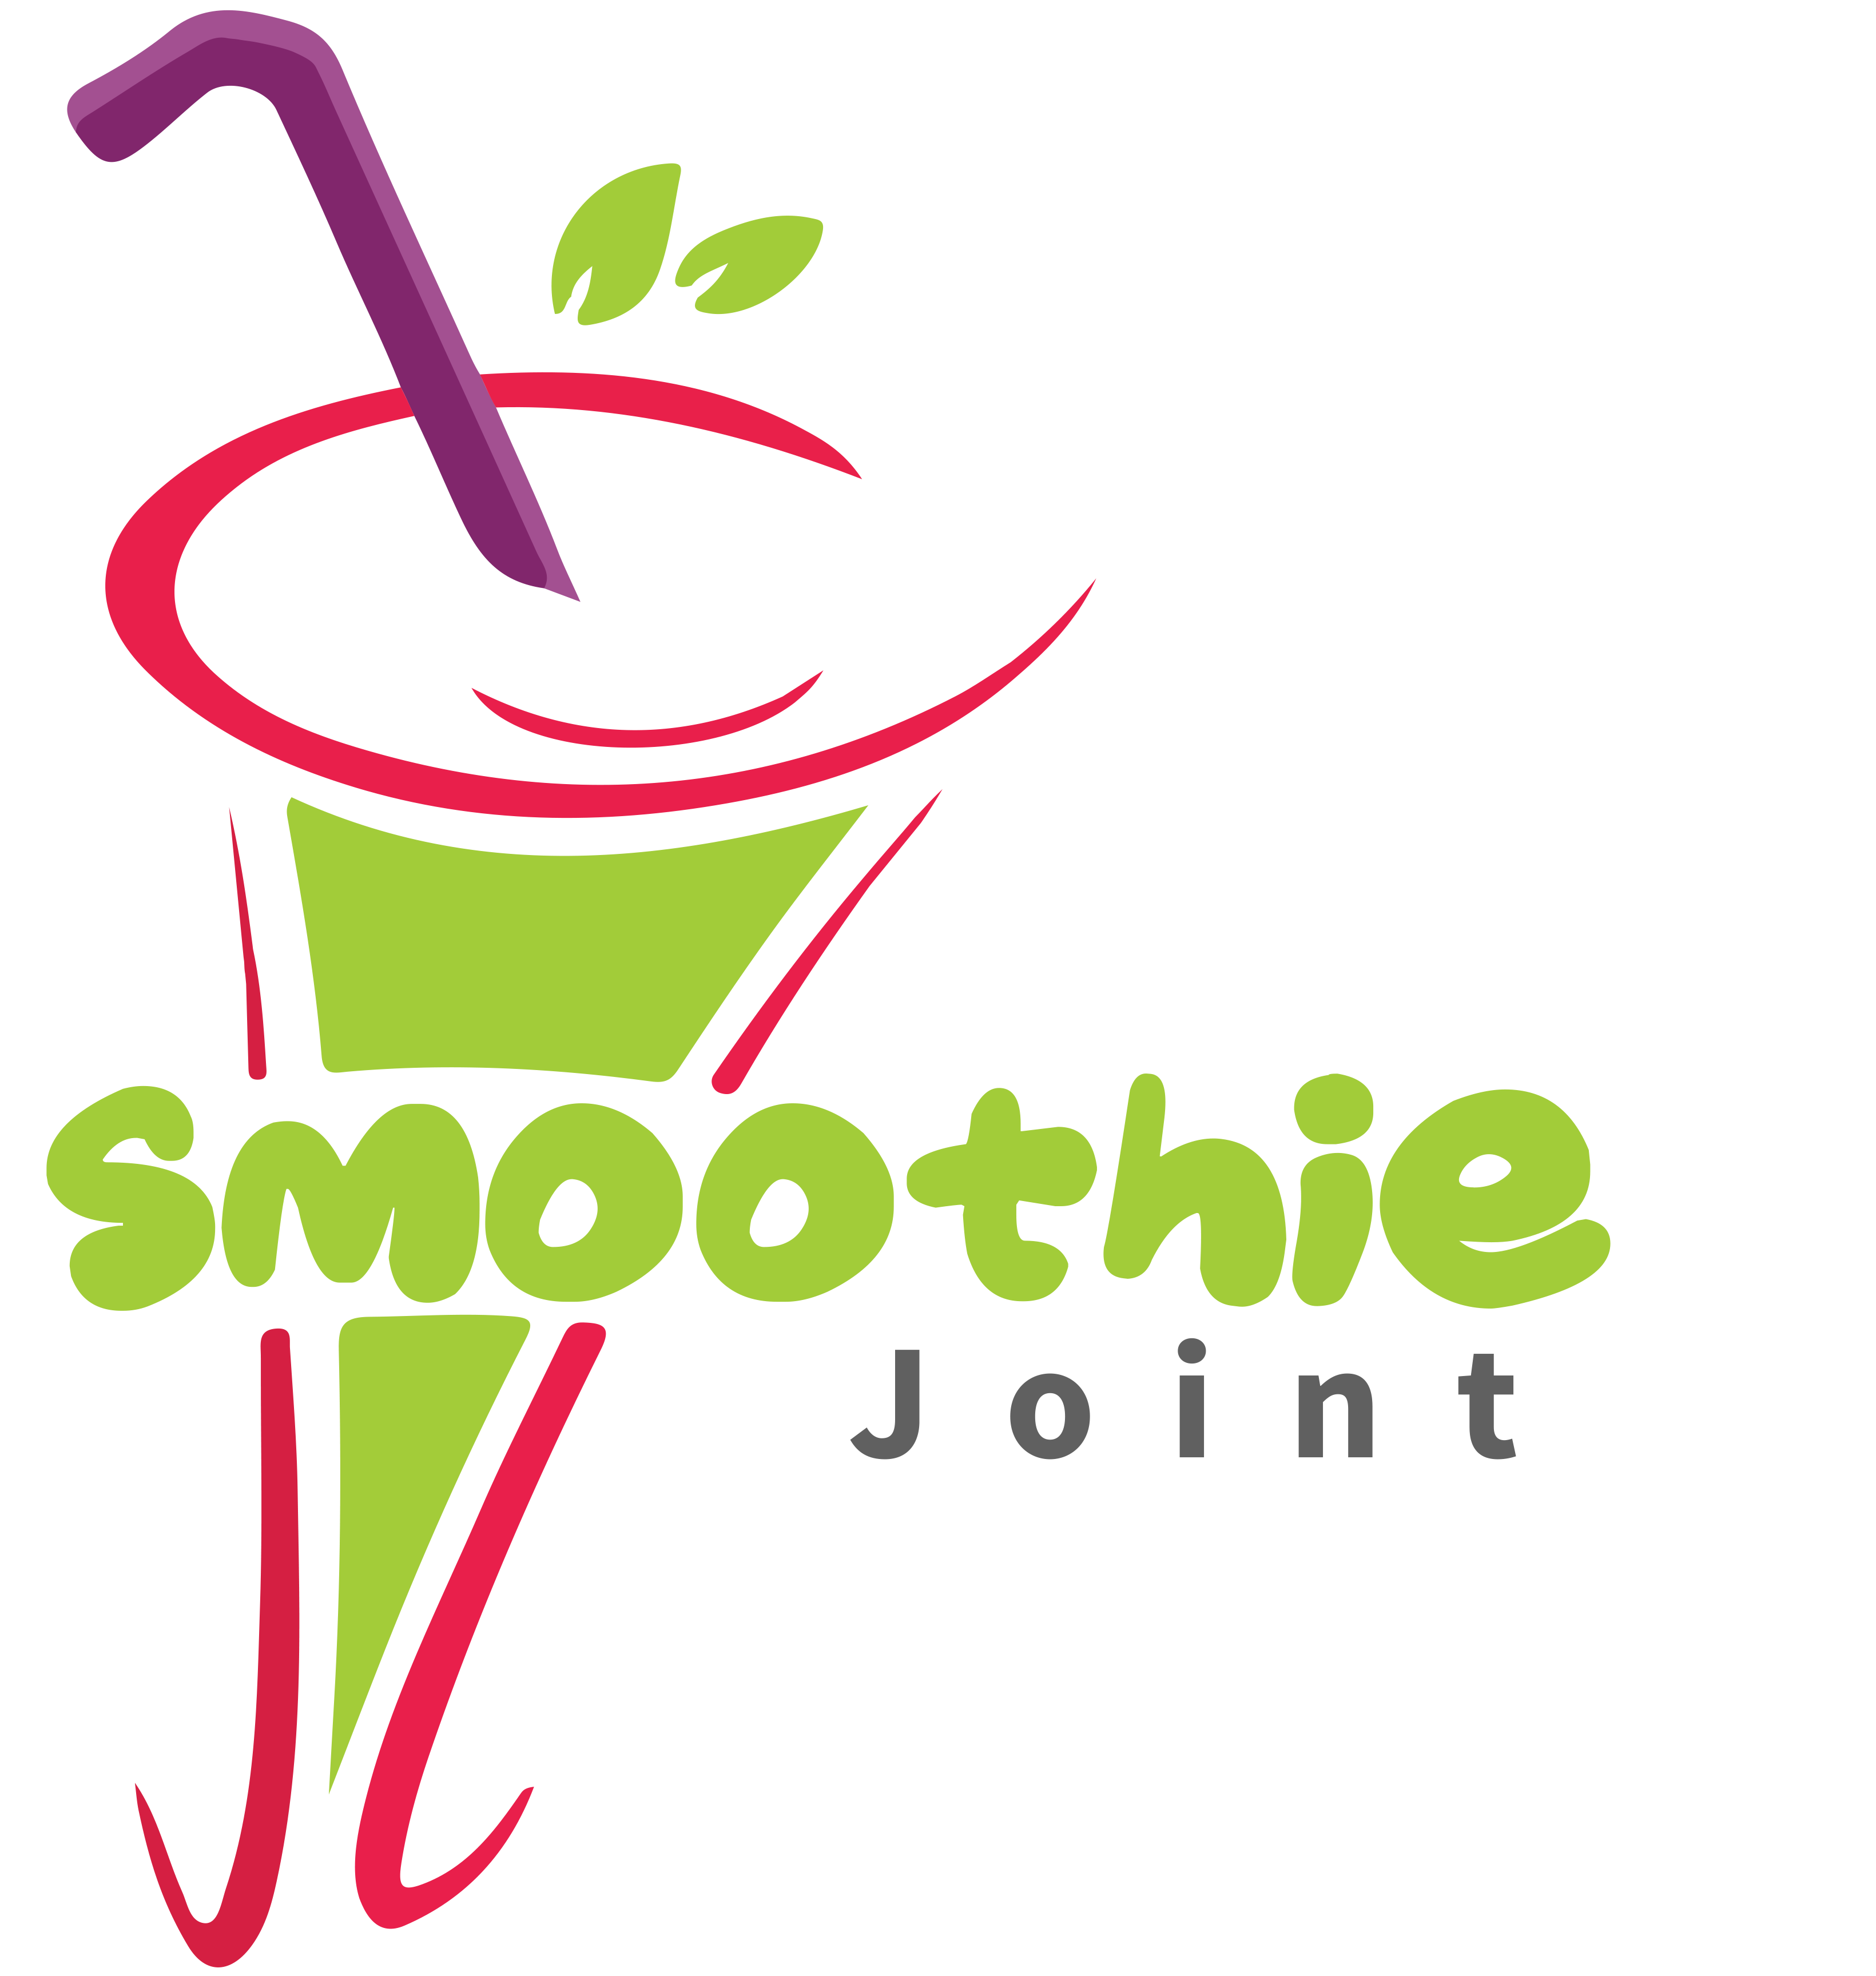 The Smoothie Joint